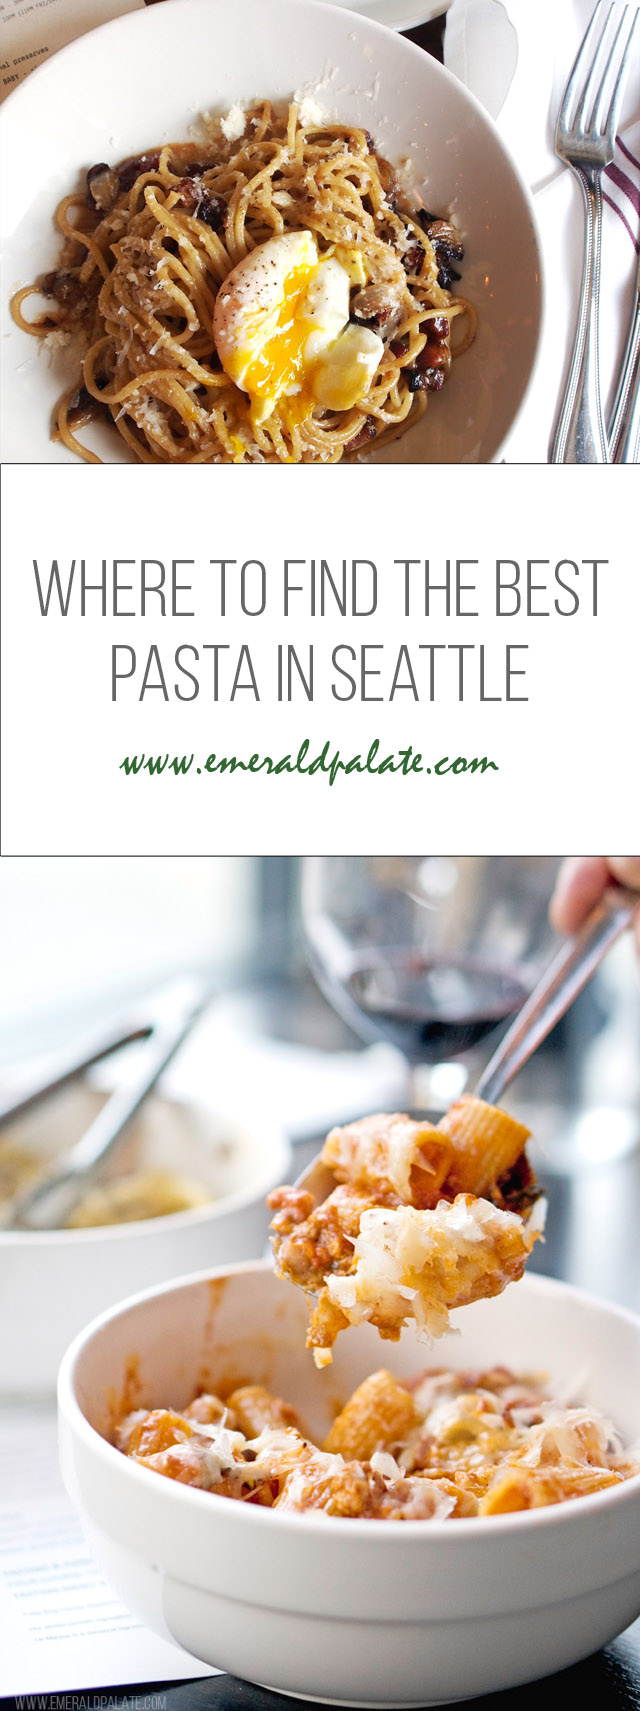 Italian restaurants serving the best pasta in Seattle. Get ready for a carb coma!